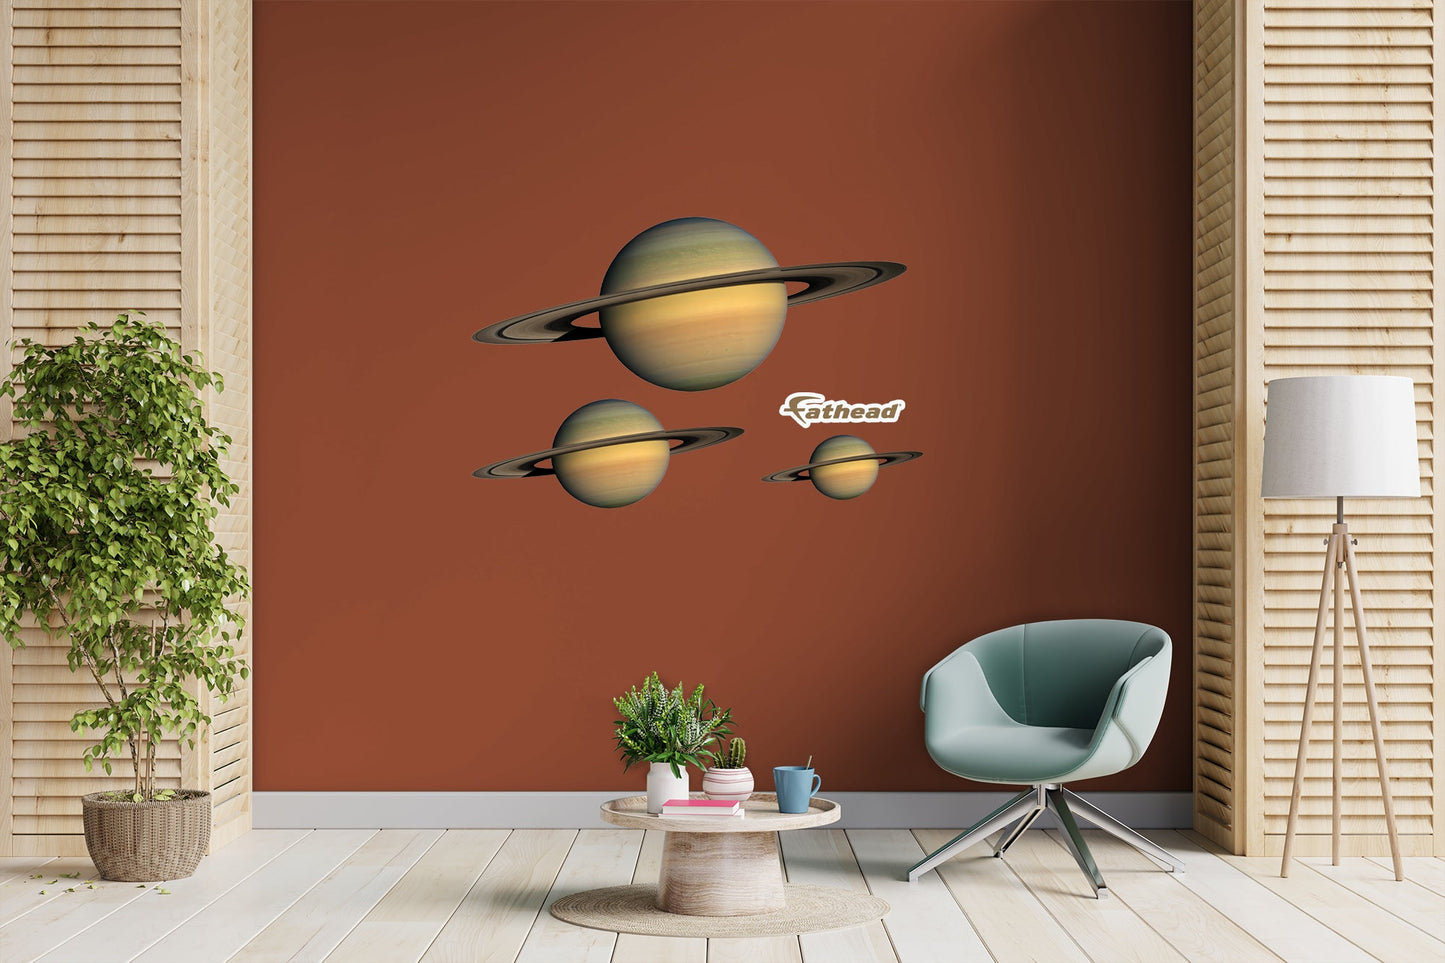 Planets: Saturn RealBig - Removable Adhesive Decal